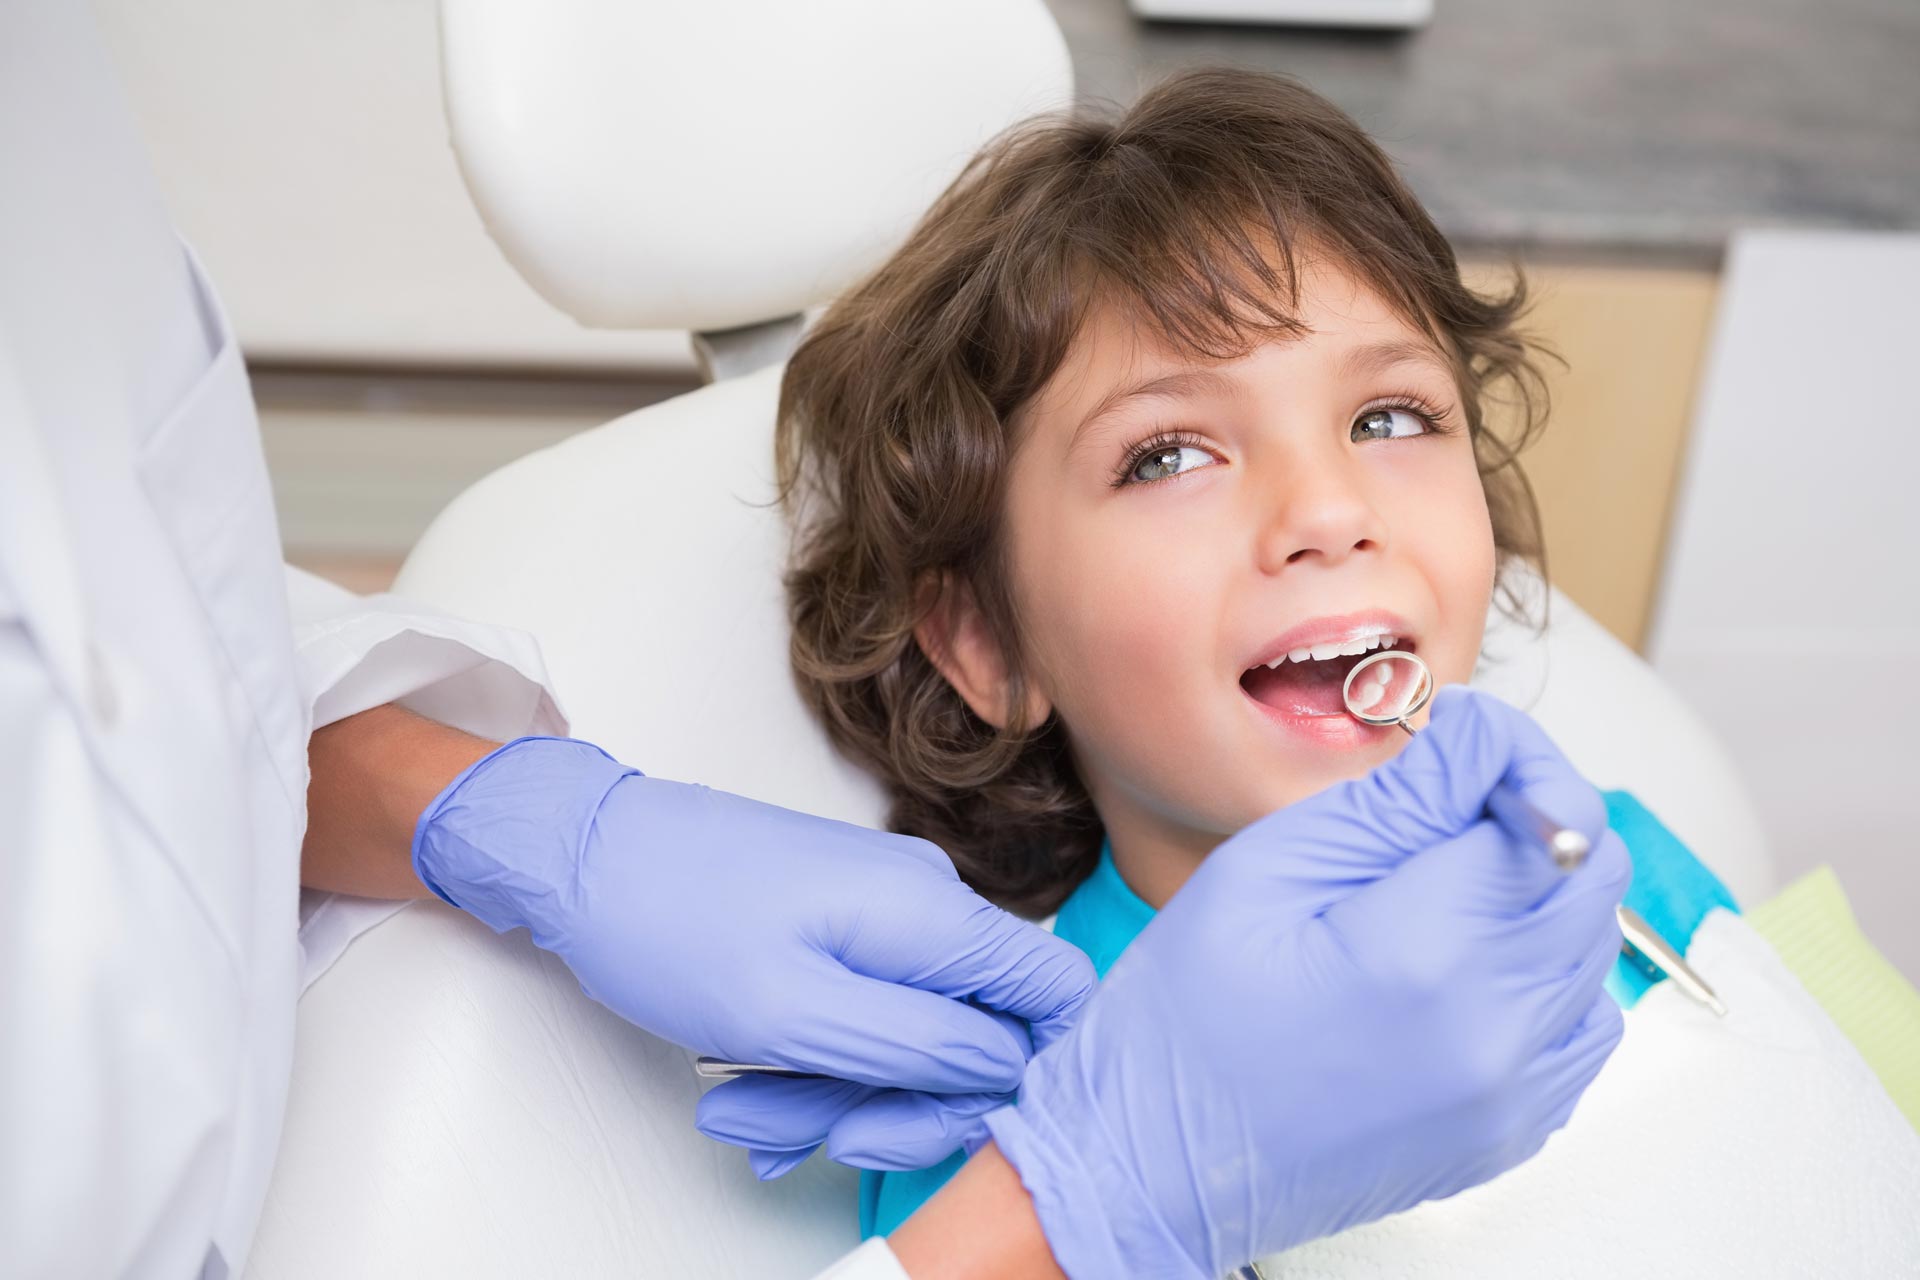 Why choose a specialist dentist for children?